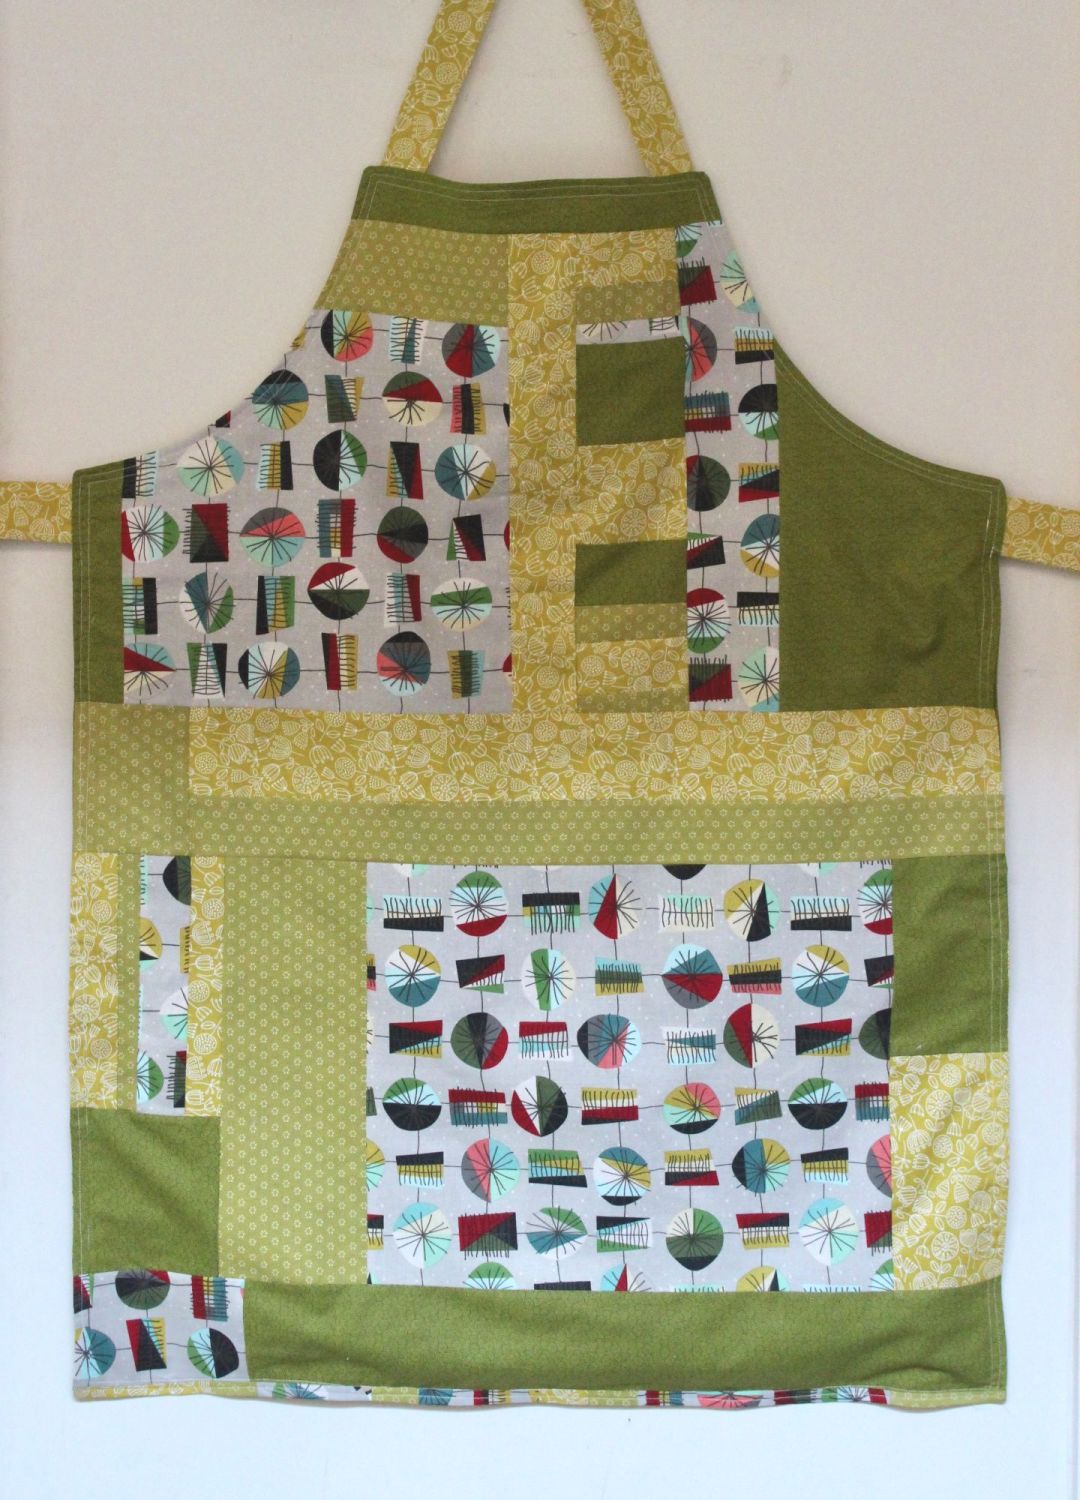 Reversible Apron In Greens/Yellows